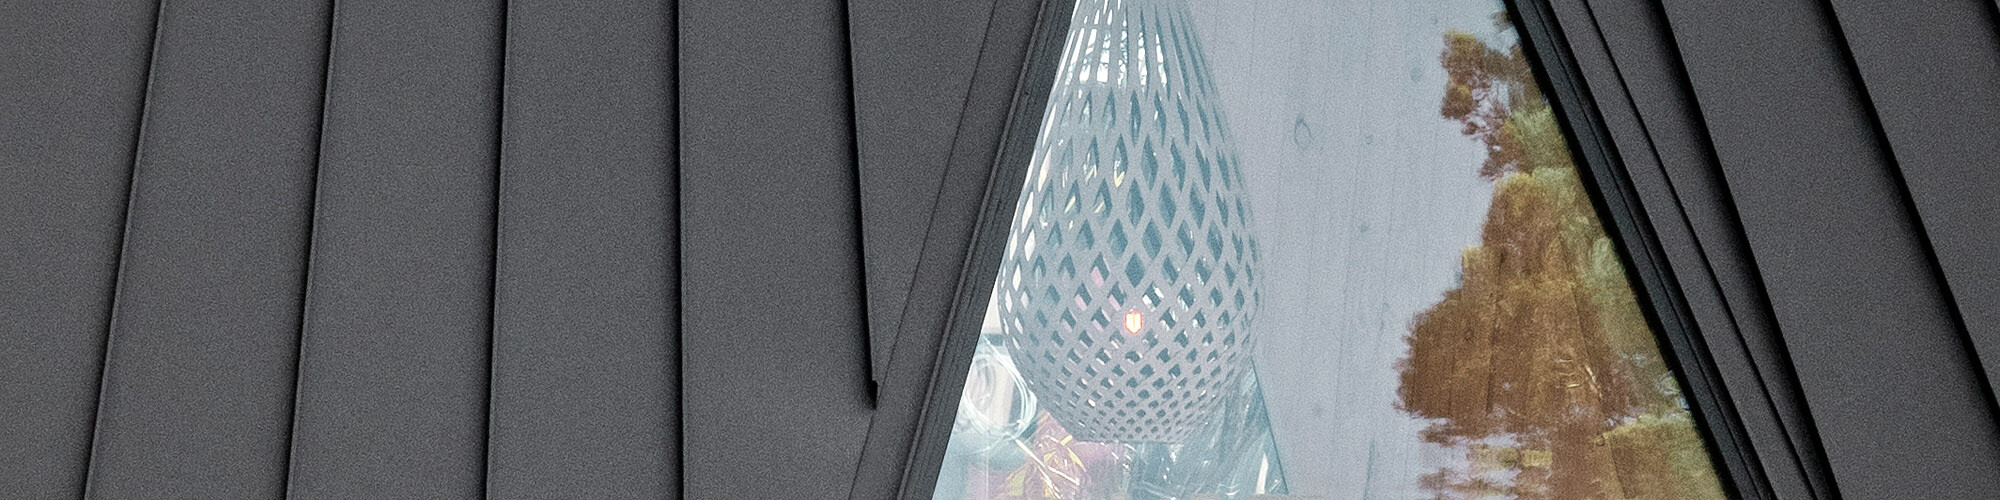 Close-up of the hut with the even PREFA aluminium and the permeable, drop-shaped lampshade that you can see through the window.